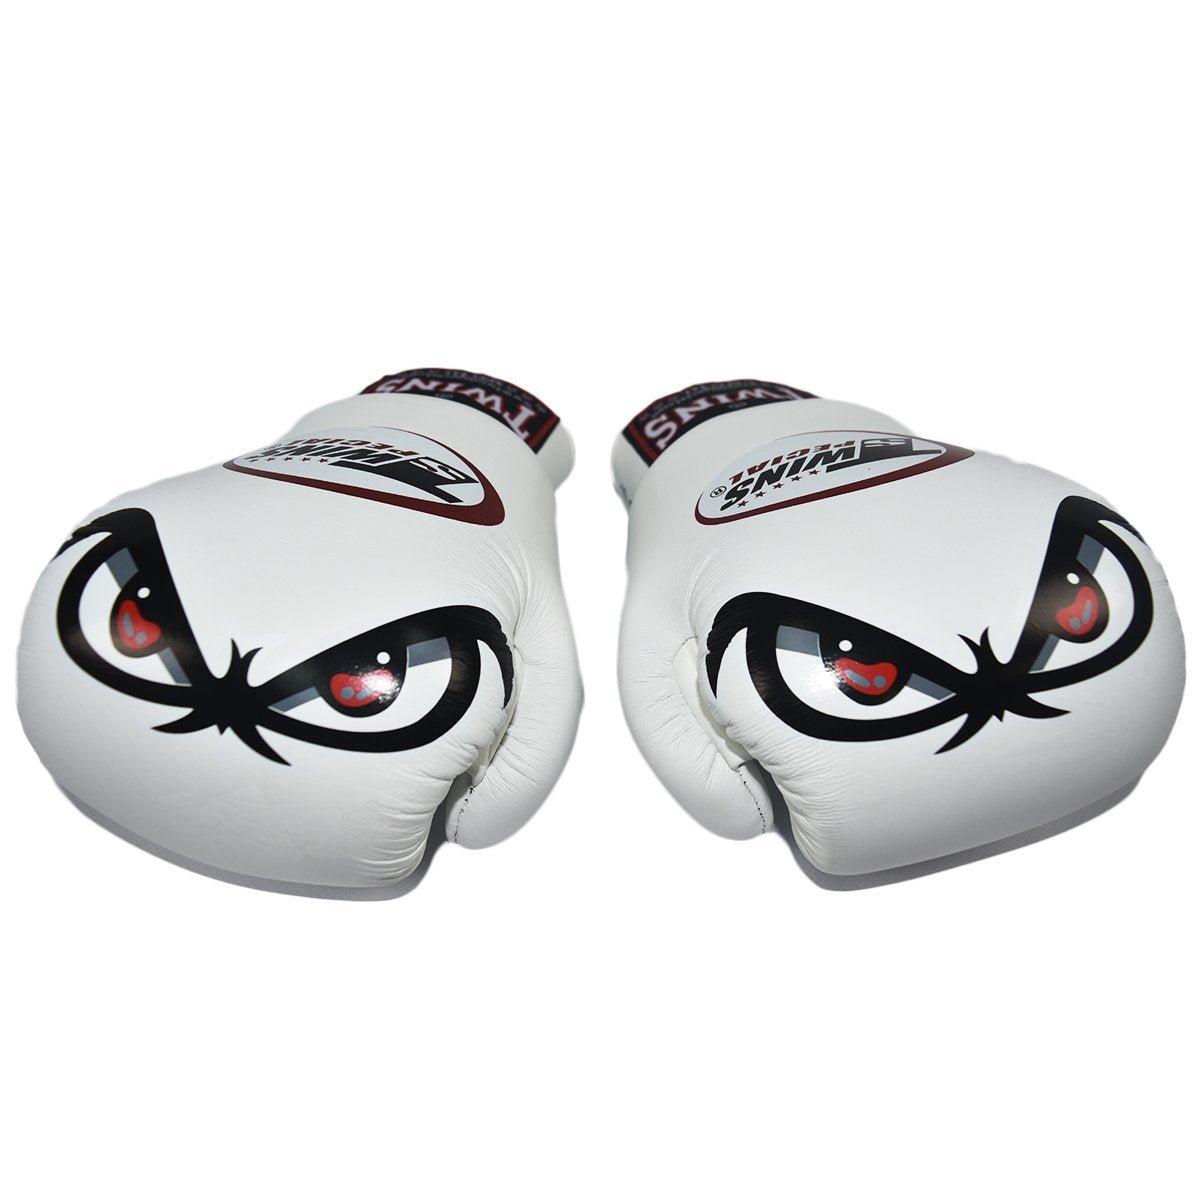 Twins Special BOXING GLOVES FBGVL3-25 WHITE - SUPER EXPORT SHOP